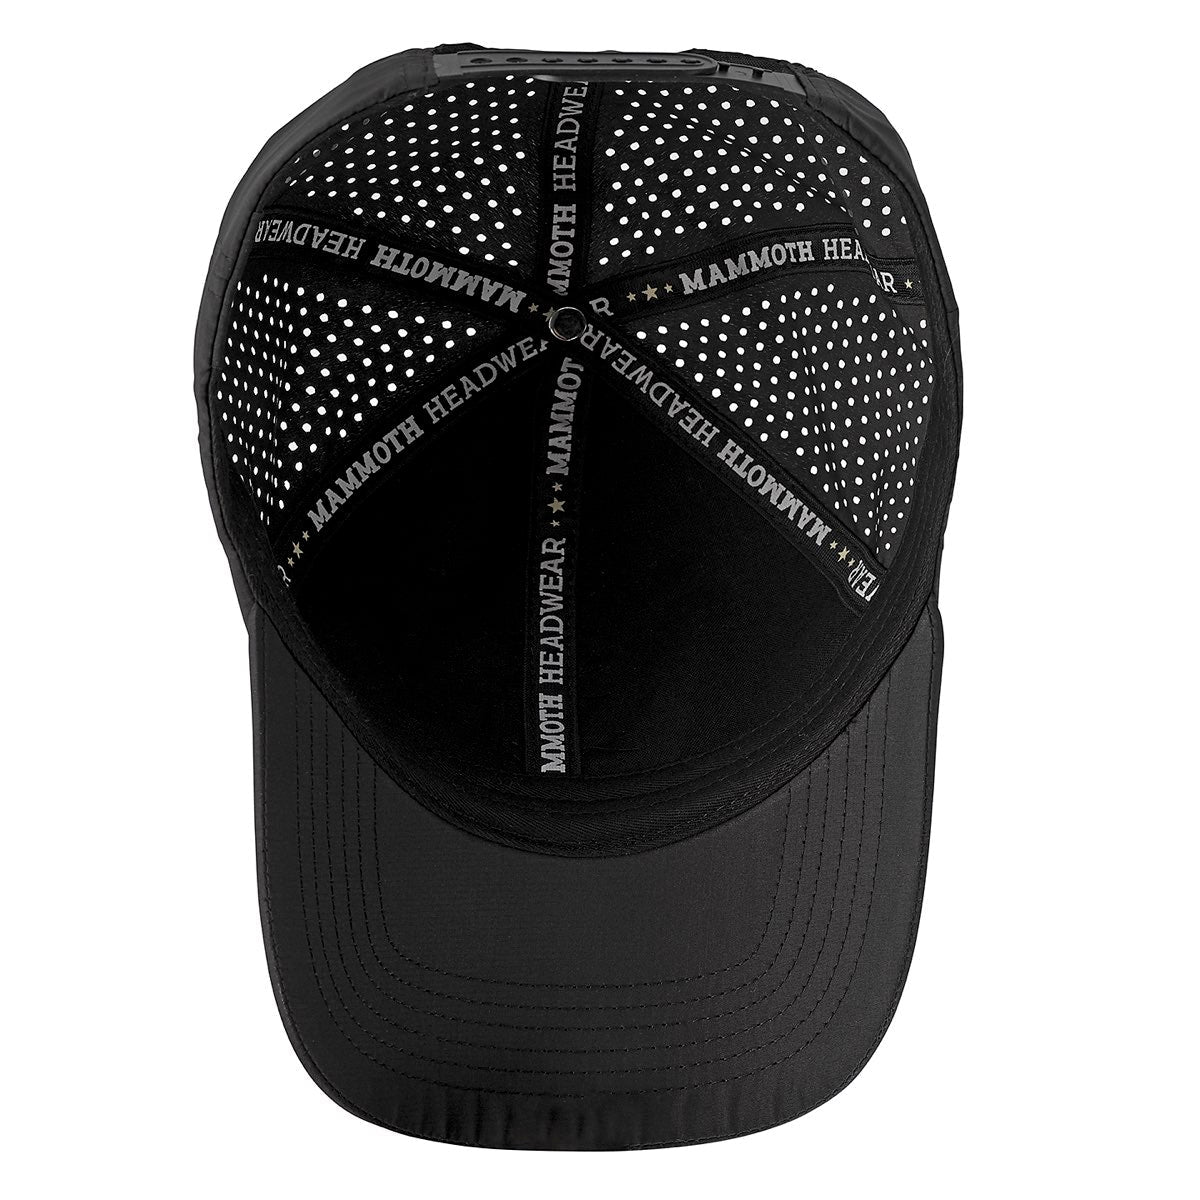 CLASSIC PERFORMANCE SNAPBACK XXL - BLACKED OUT - Inside View